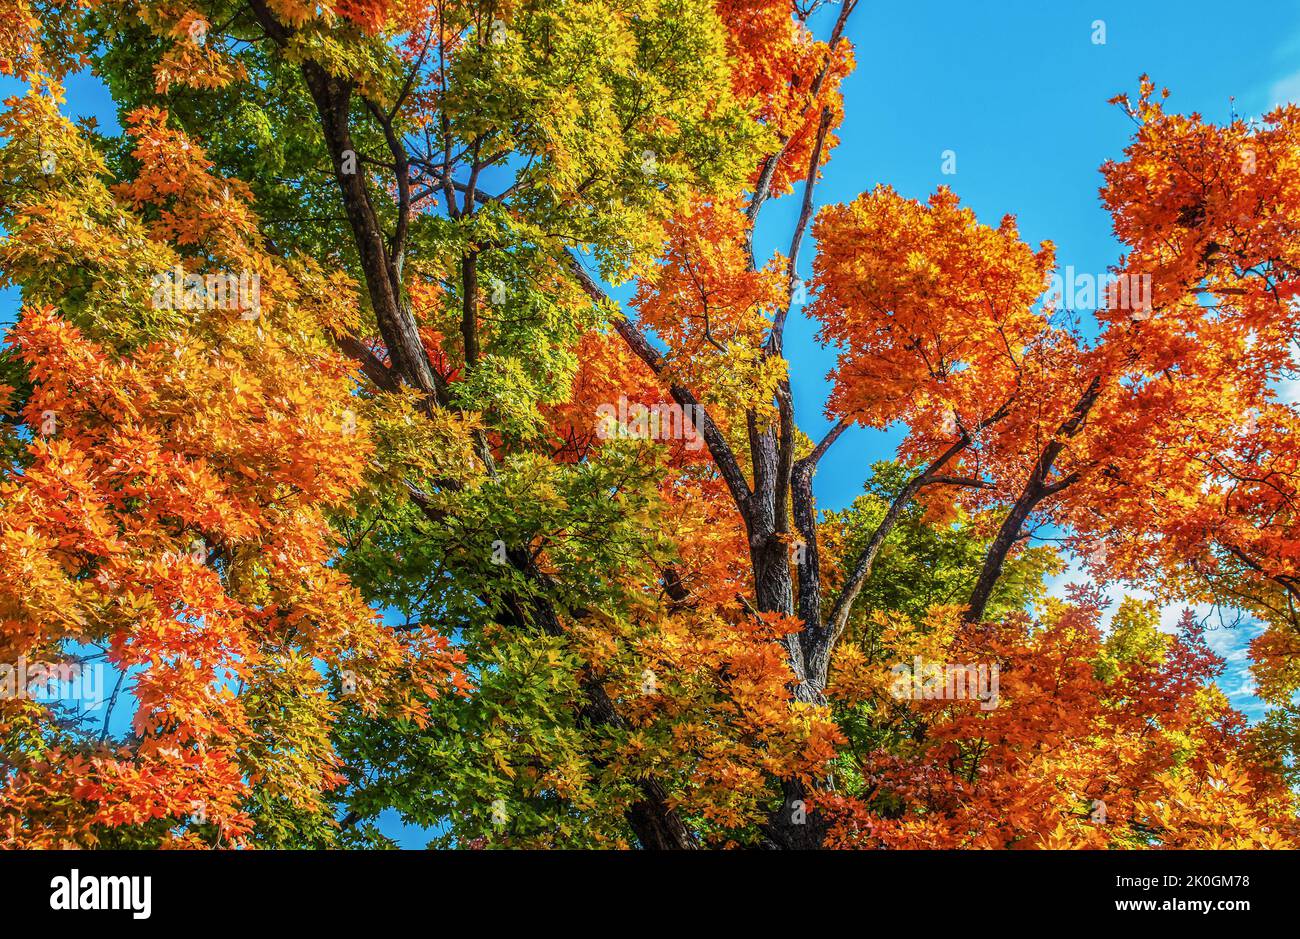 Looking up at autumn trees filling the frame with vibrant multi-colored all leaves against a brilliant blue sky Stock Photo